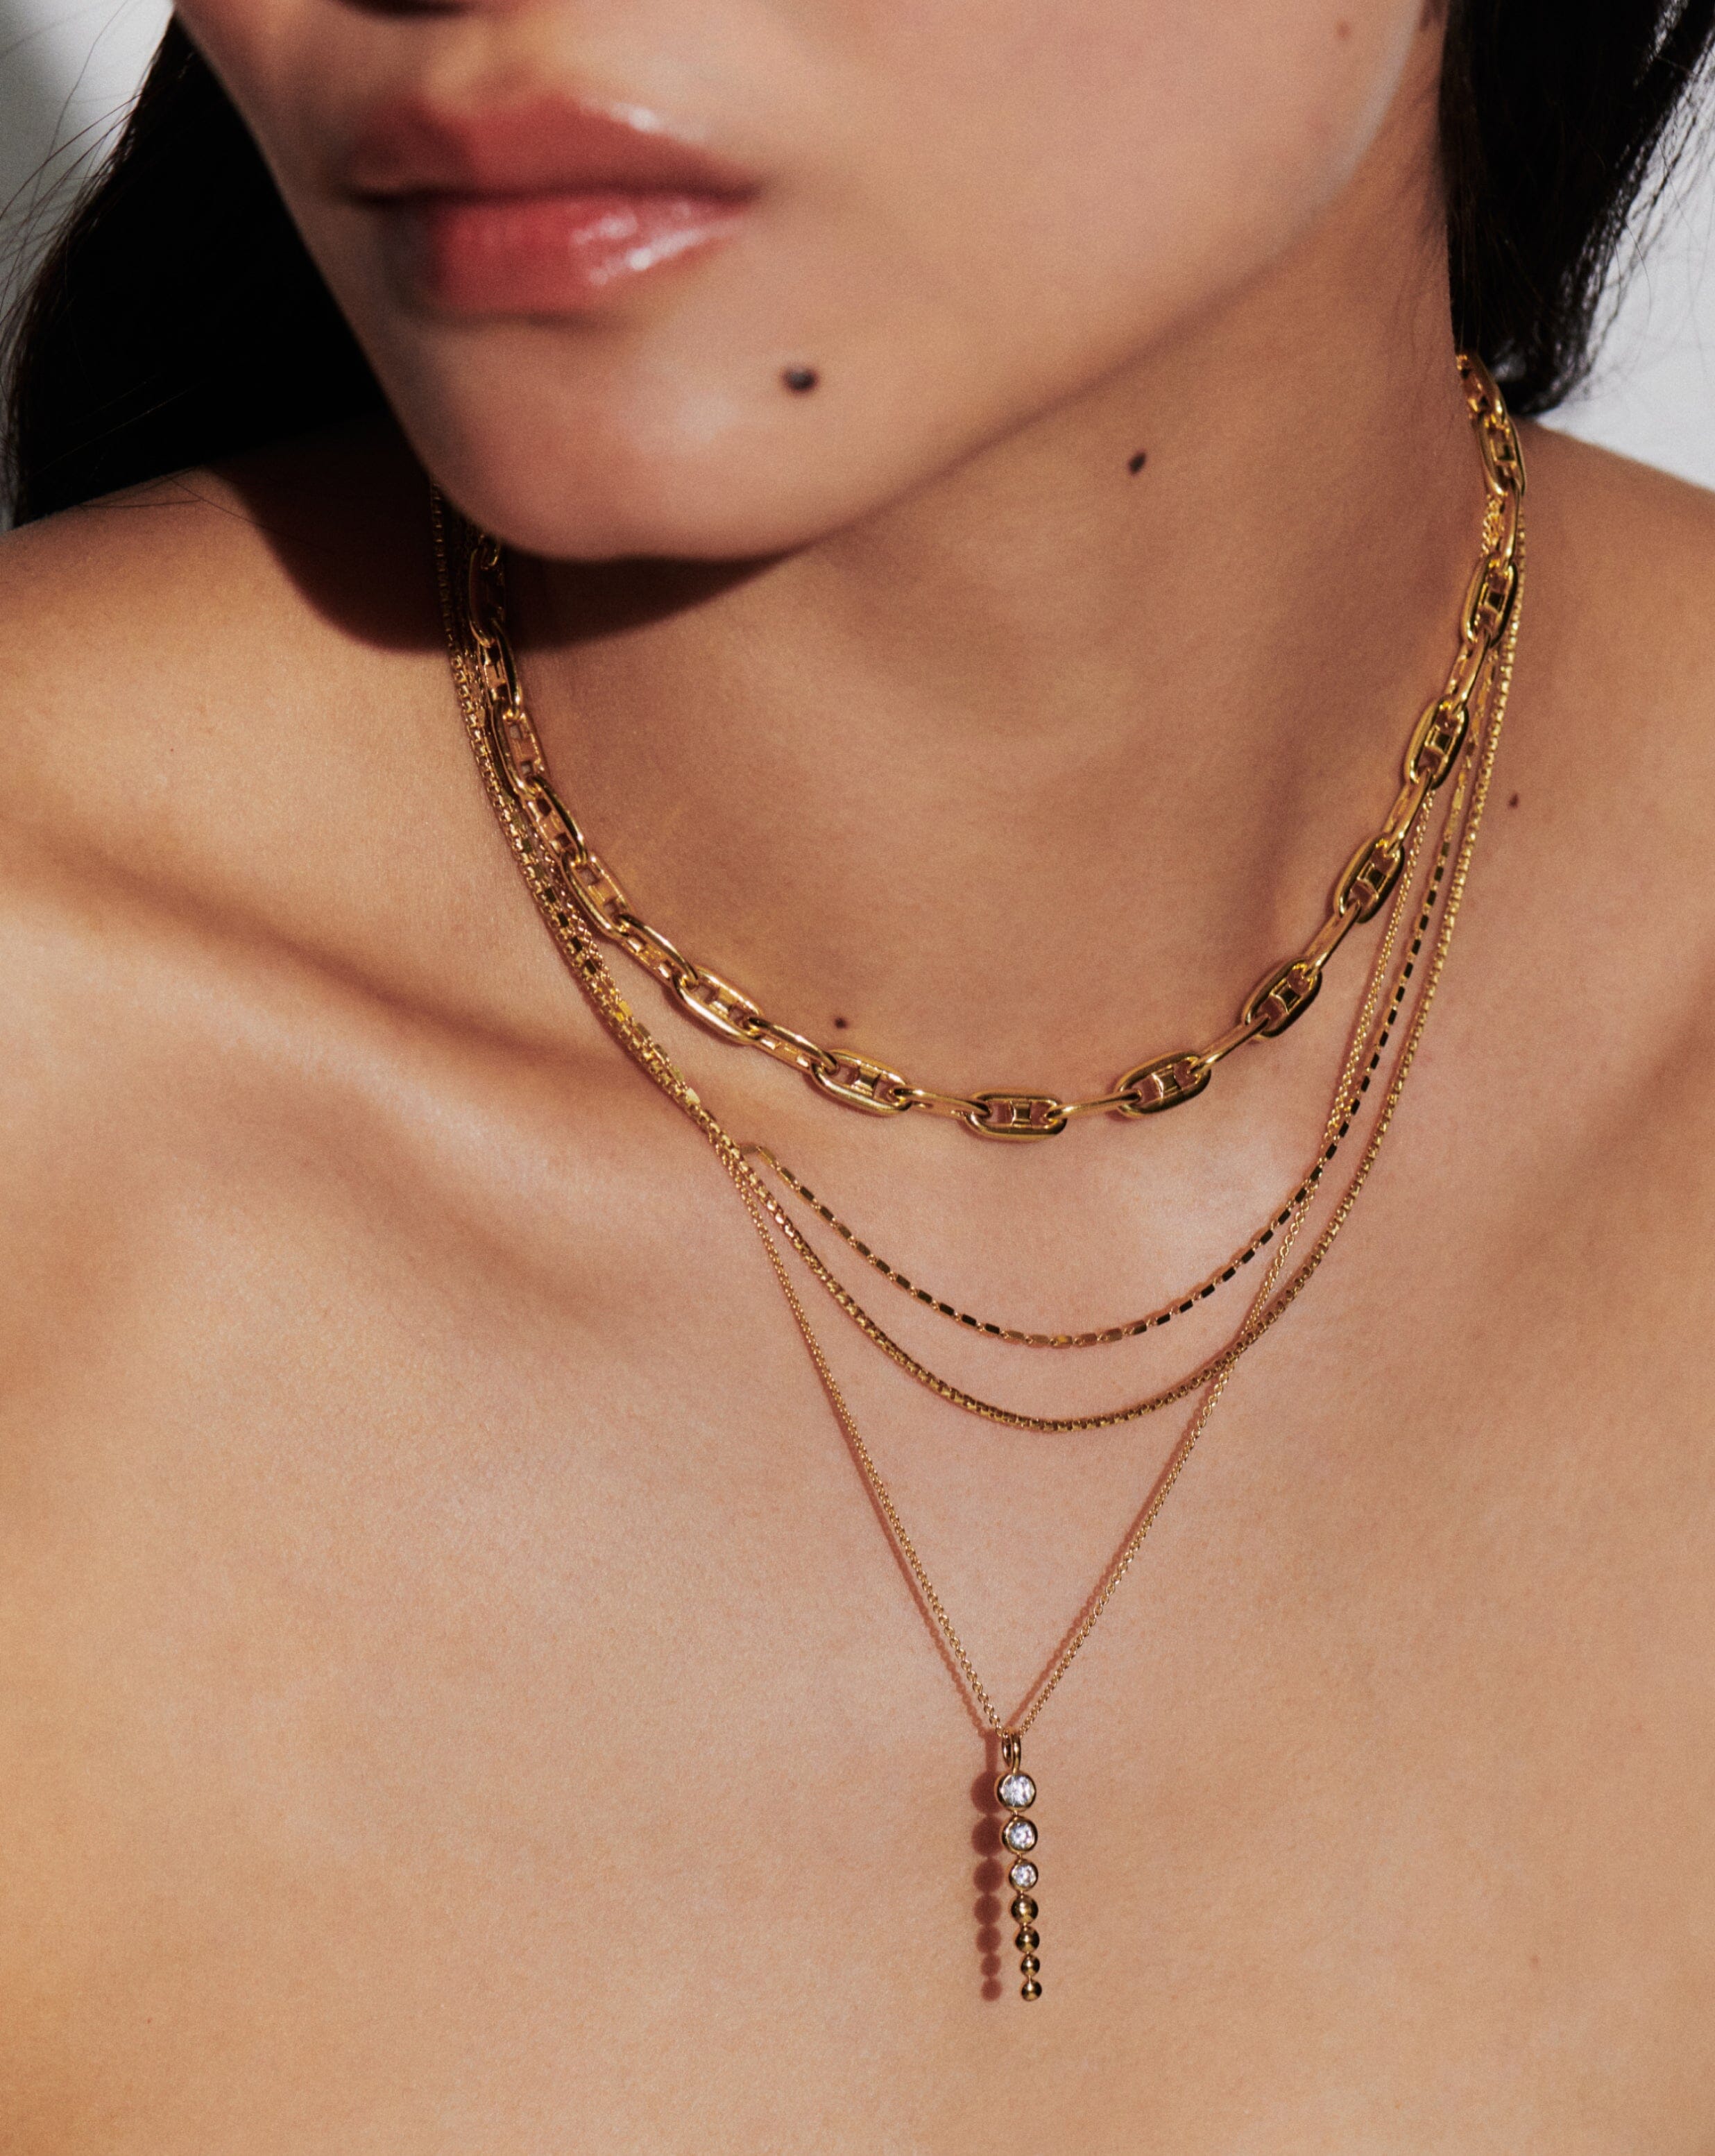 18k Yellow Gold 5mm Round Box Chain Necklace 24 Inches | Sarraf.com